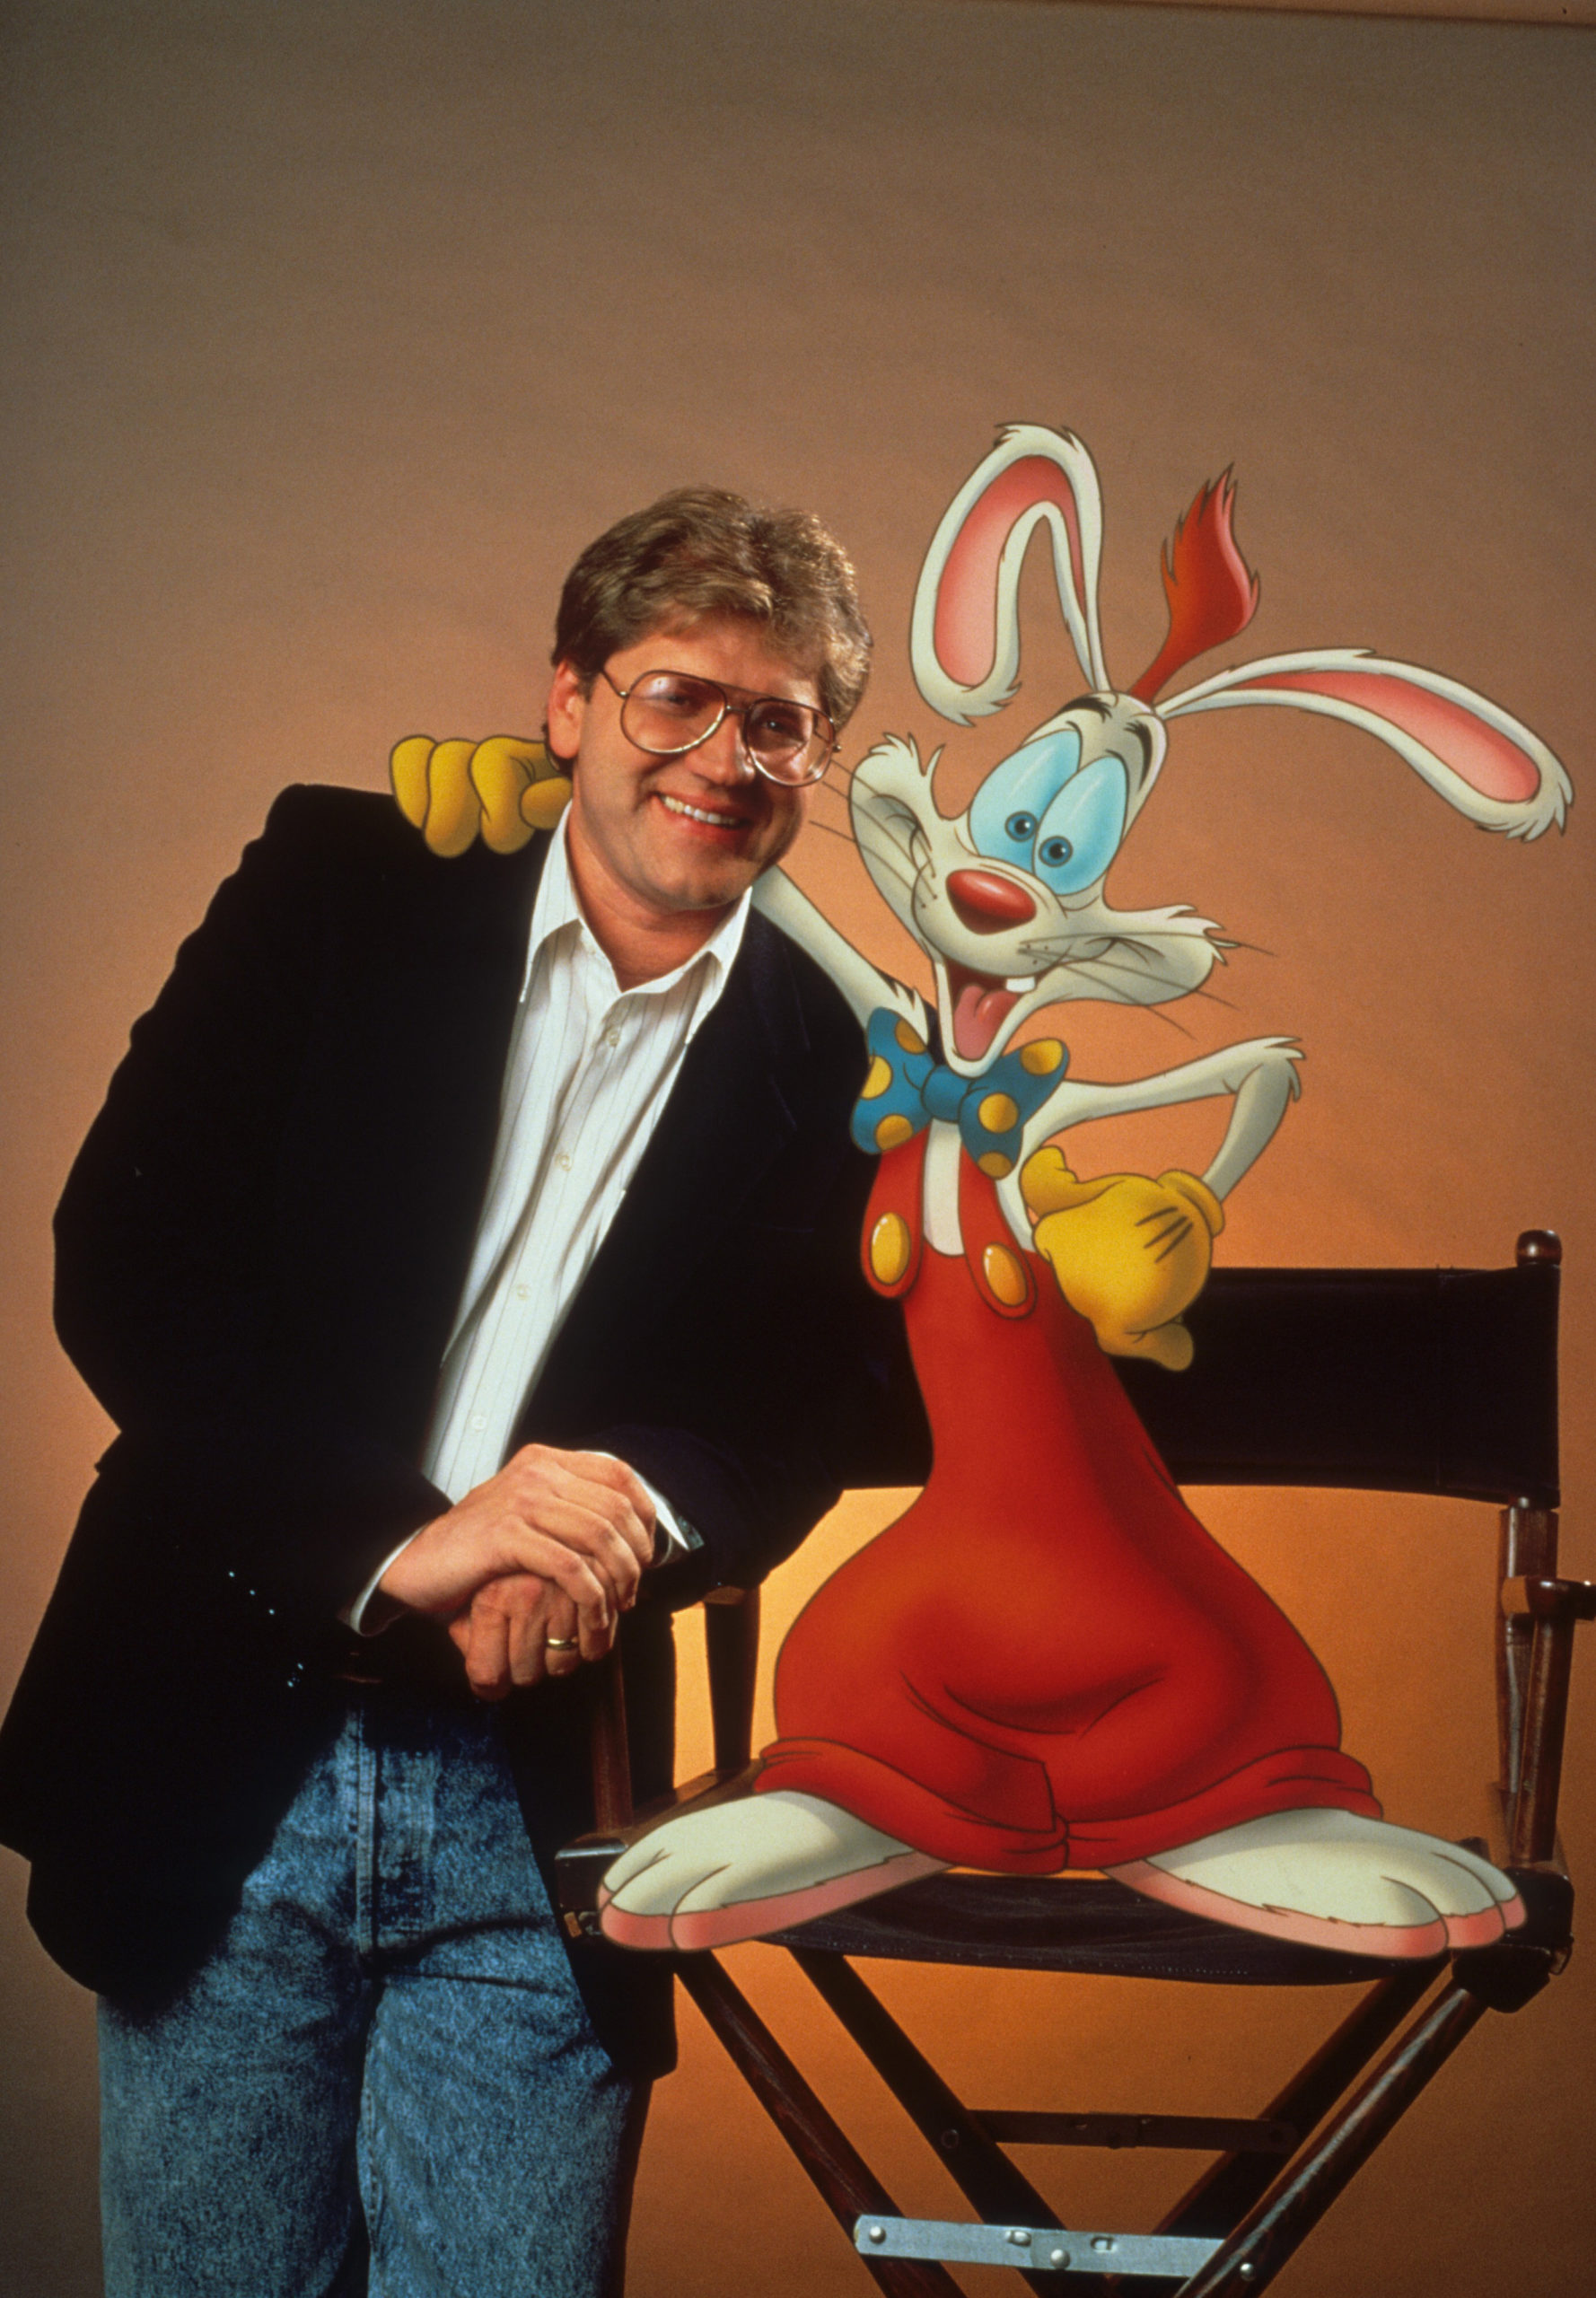 Charles Fleischer poses with Roger Rabbit in a publicity portrait. (Image: Getty)